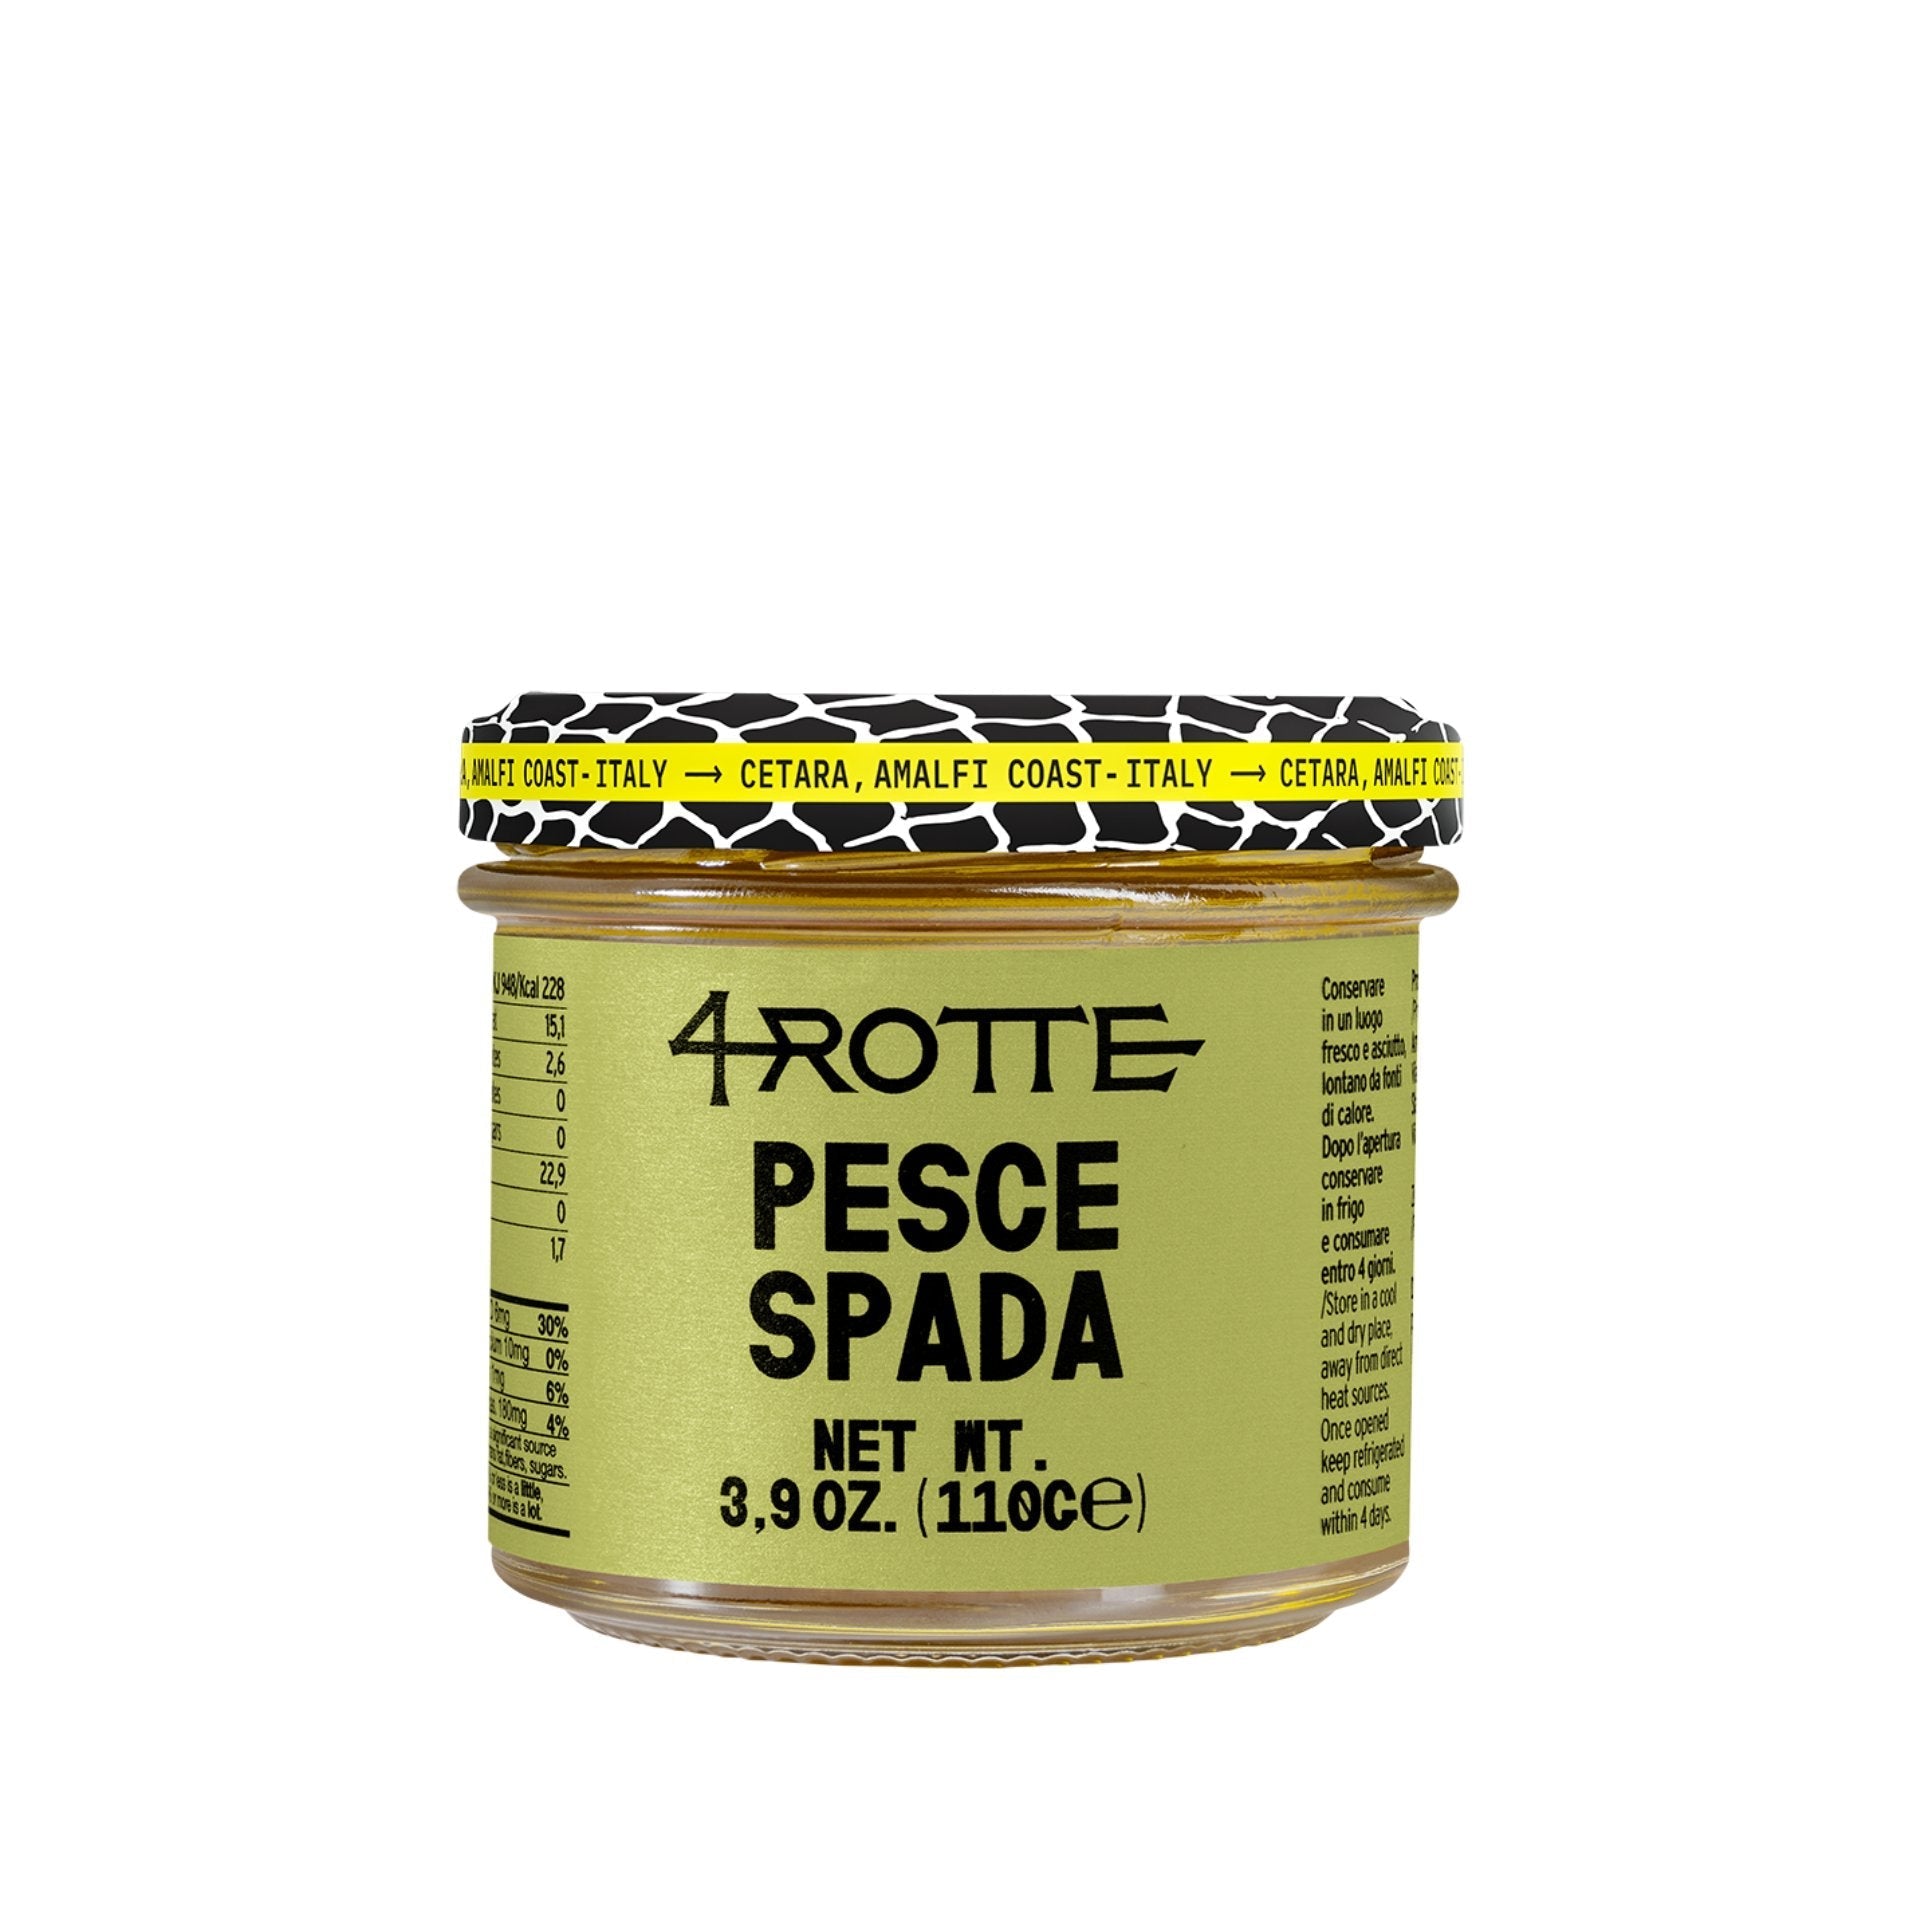 Armatore 4 Rotte Swordfish in Olive Oil 110g  | Imported and distributed in the UK by Just Gourmet Foods